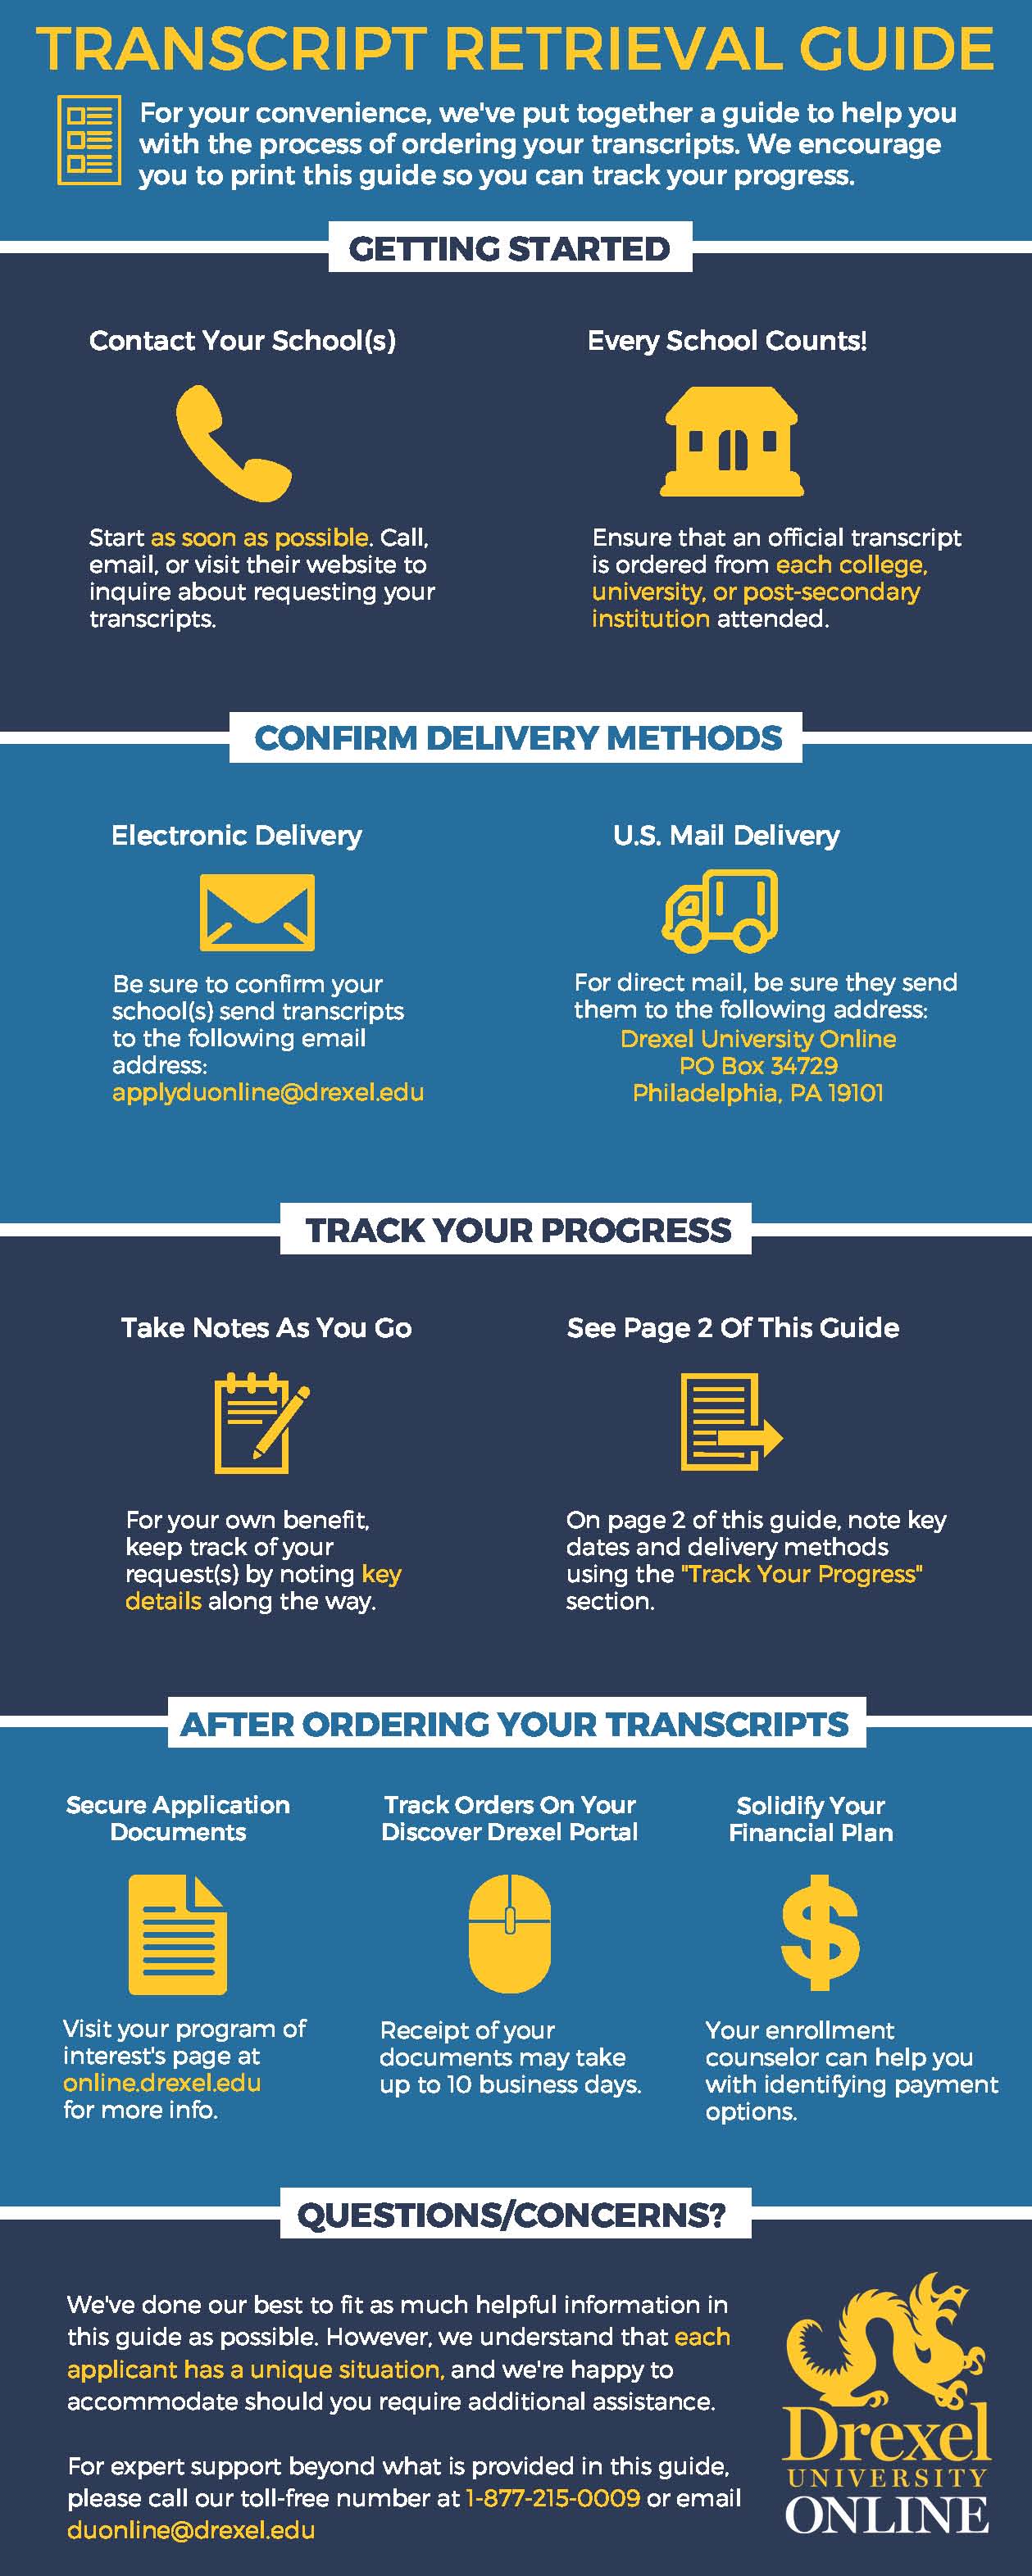 Infographic helping prospective online students requesting transcripts. Created by Drexel University Online.